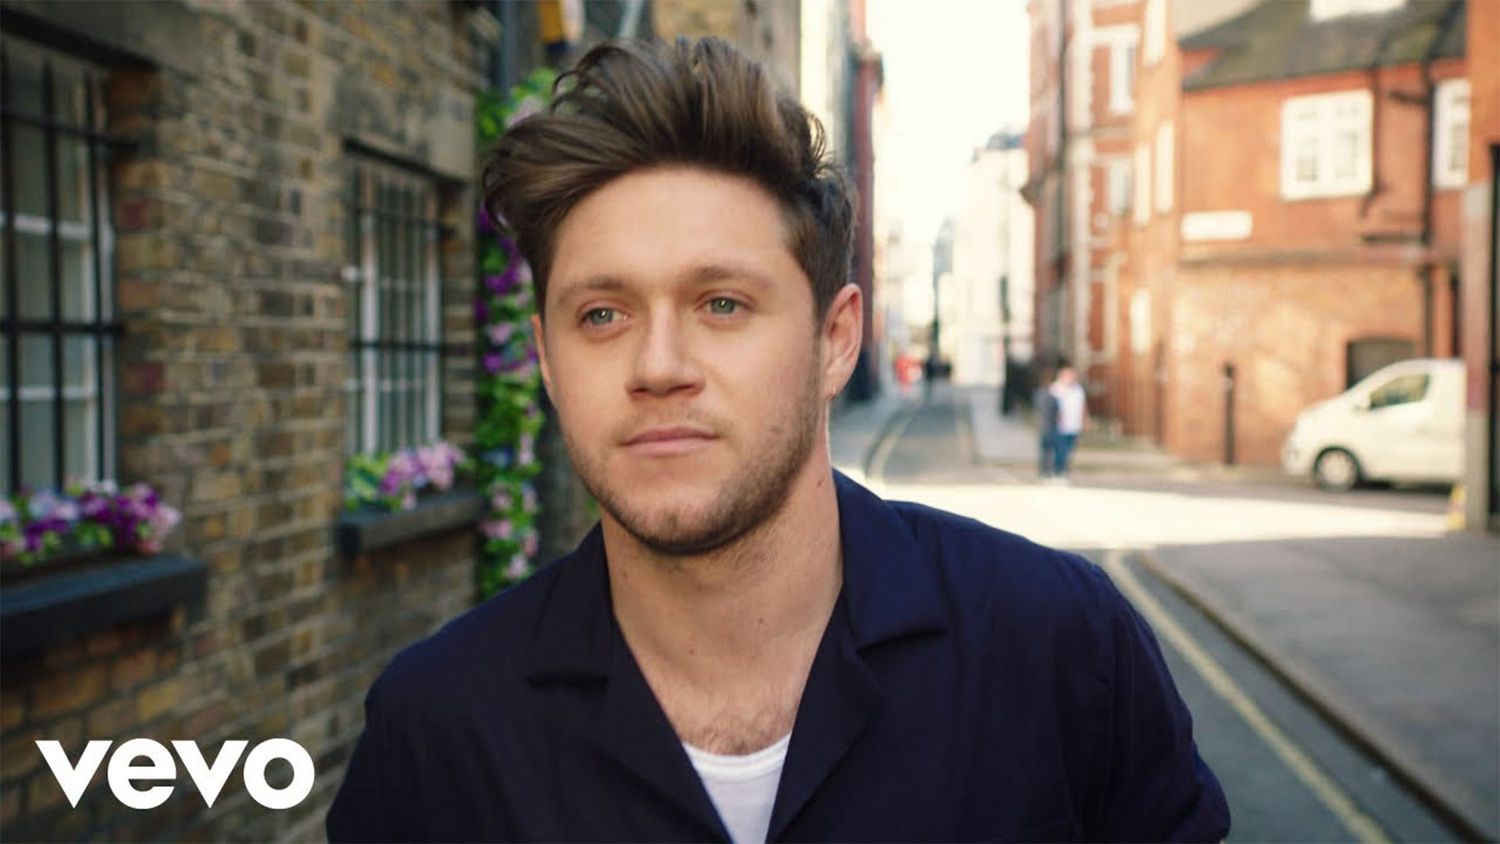 Niall Horan Releases Music Video for 'Nice to Meet Ya' | PEOPLE.com